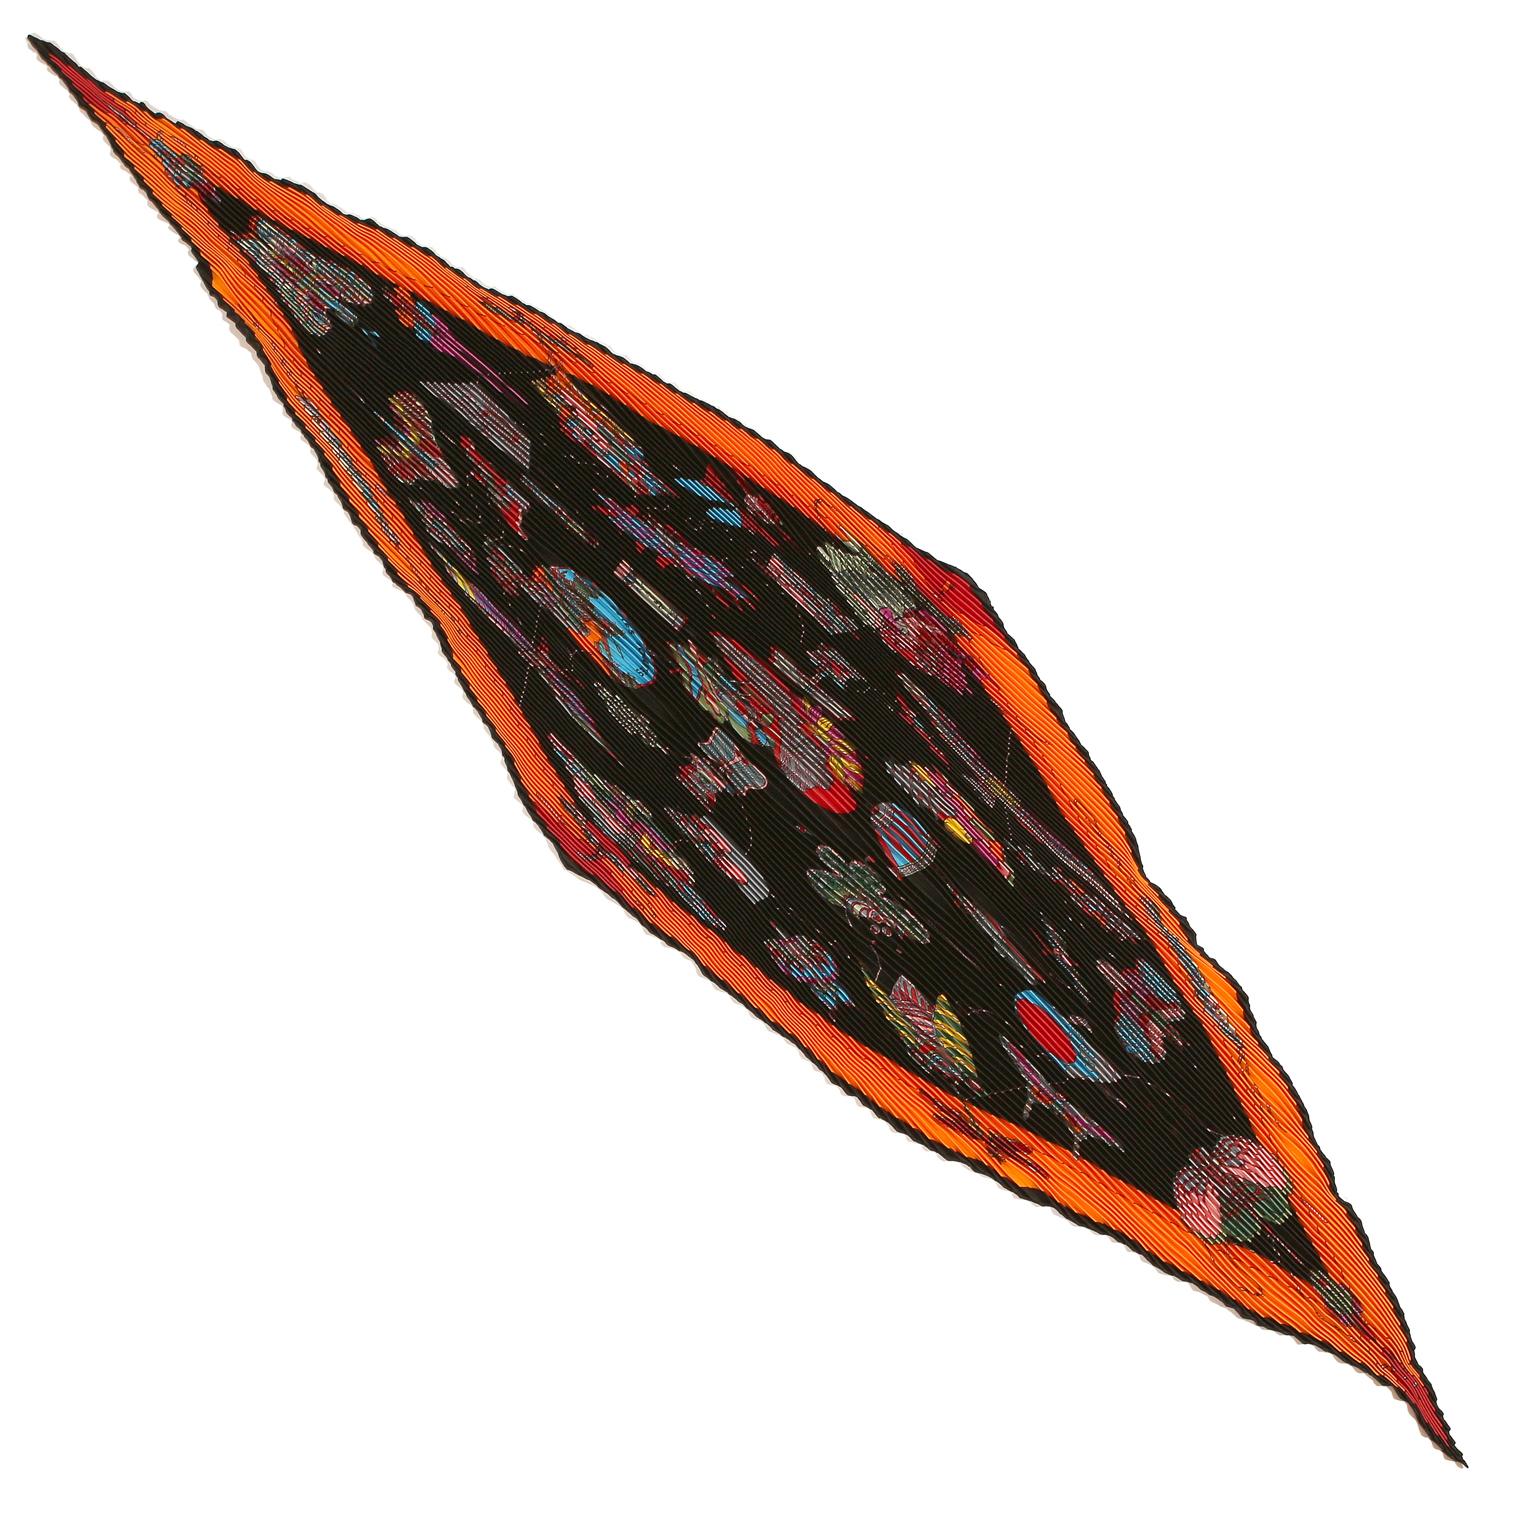 Hermès Multicolor Soies Volantes Plisse Scarf- NEW with box. 
 Orange border with a black background allows a spectacular multicolored pattern to emerge.  Asian inspired kites and lanterns shaped like insects, birds and fish.  A spectacular and rare